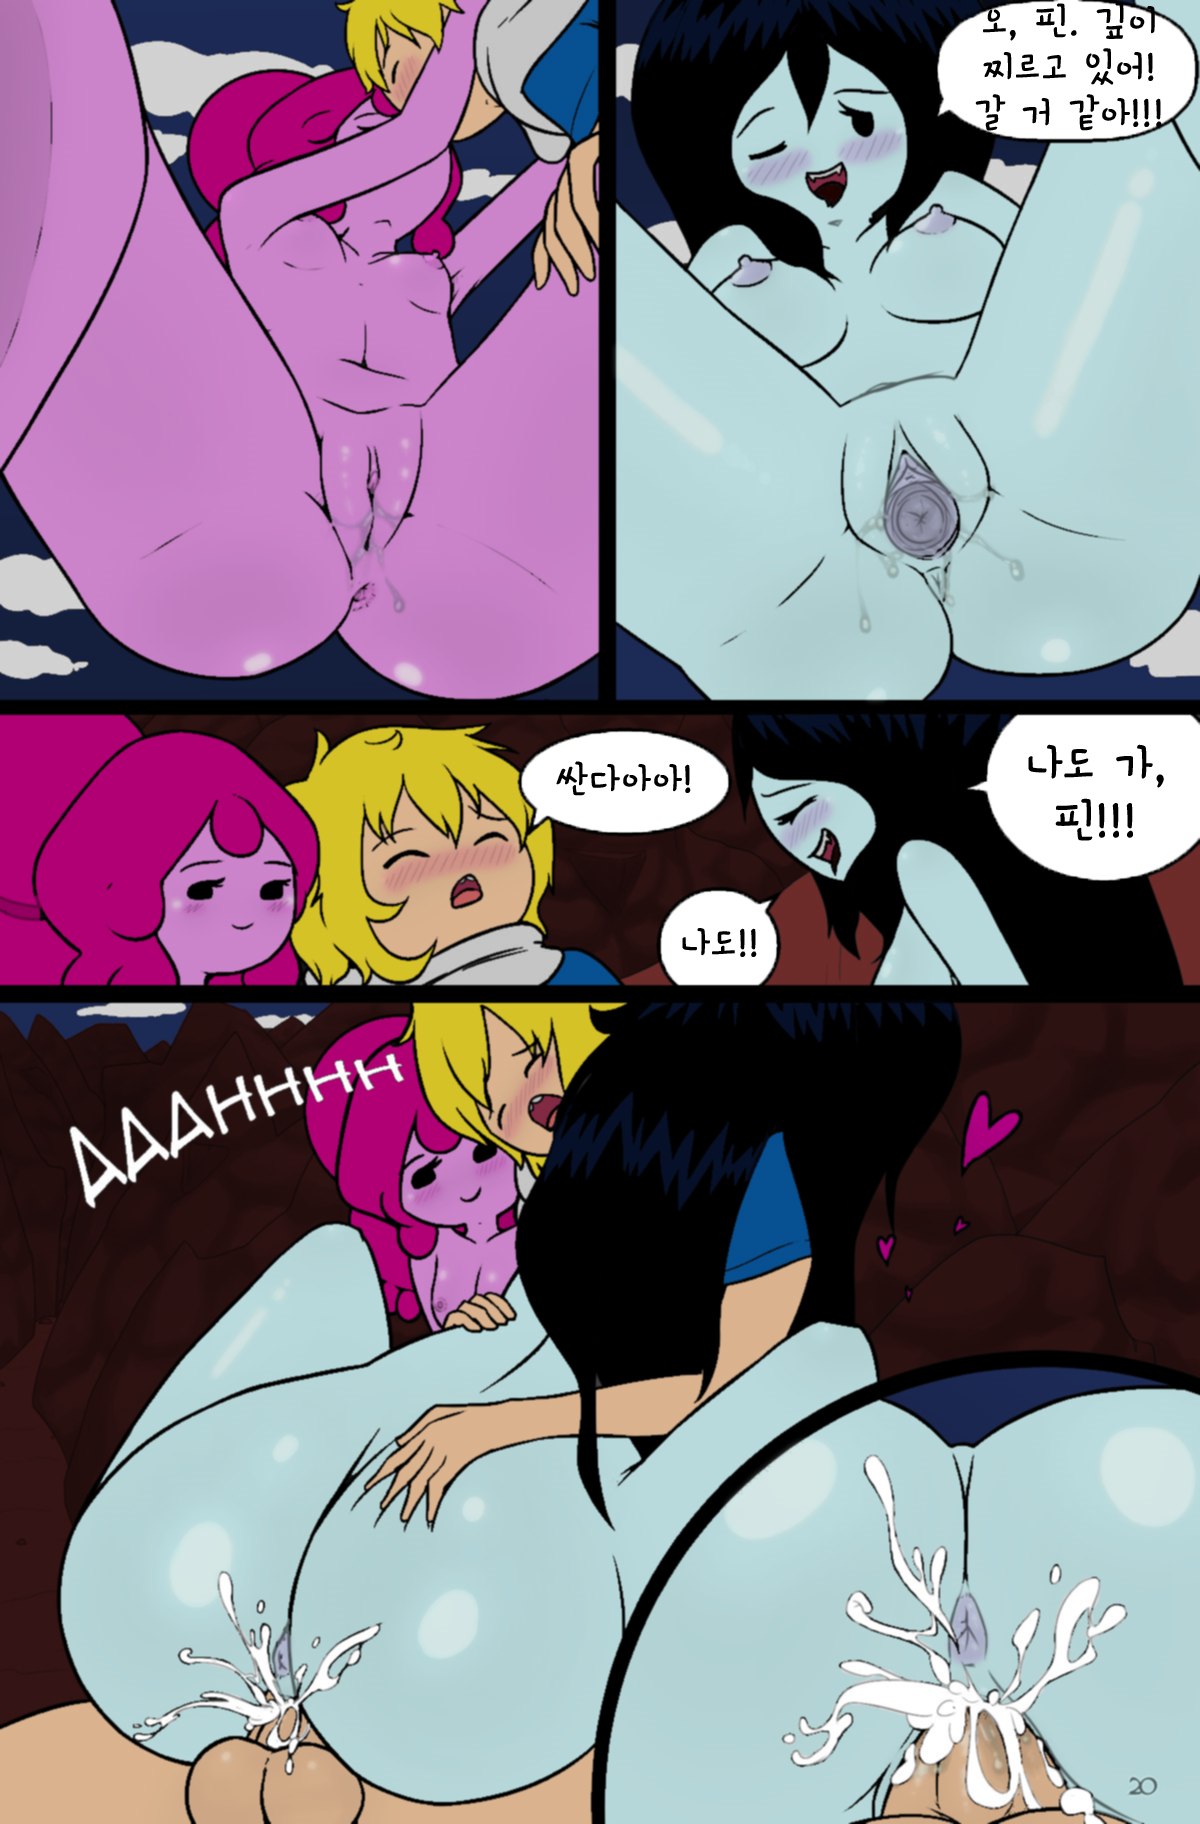 [cubbychambers] Misadventure Time Issue 2 What Was